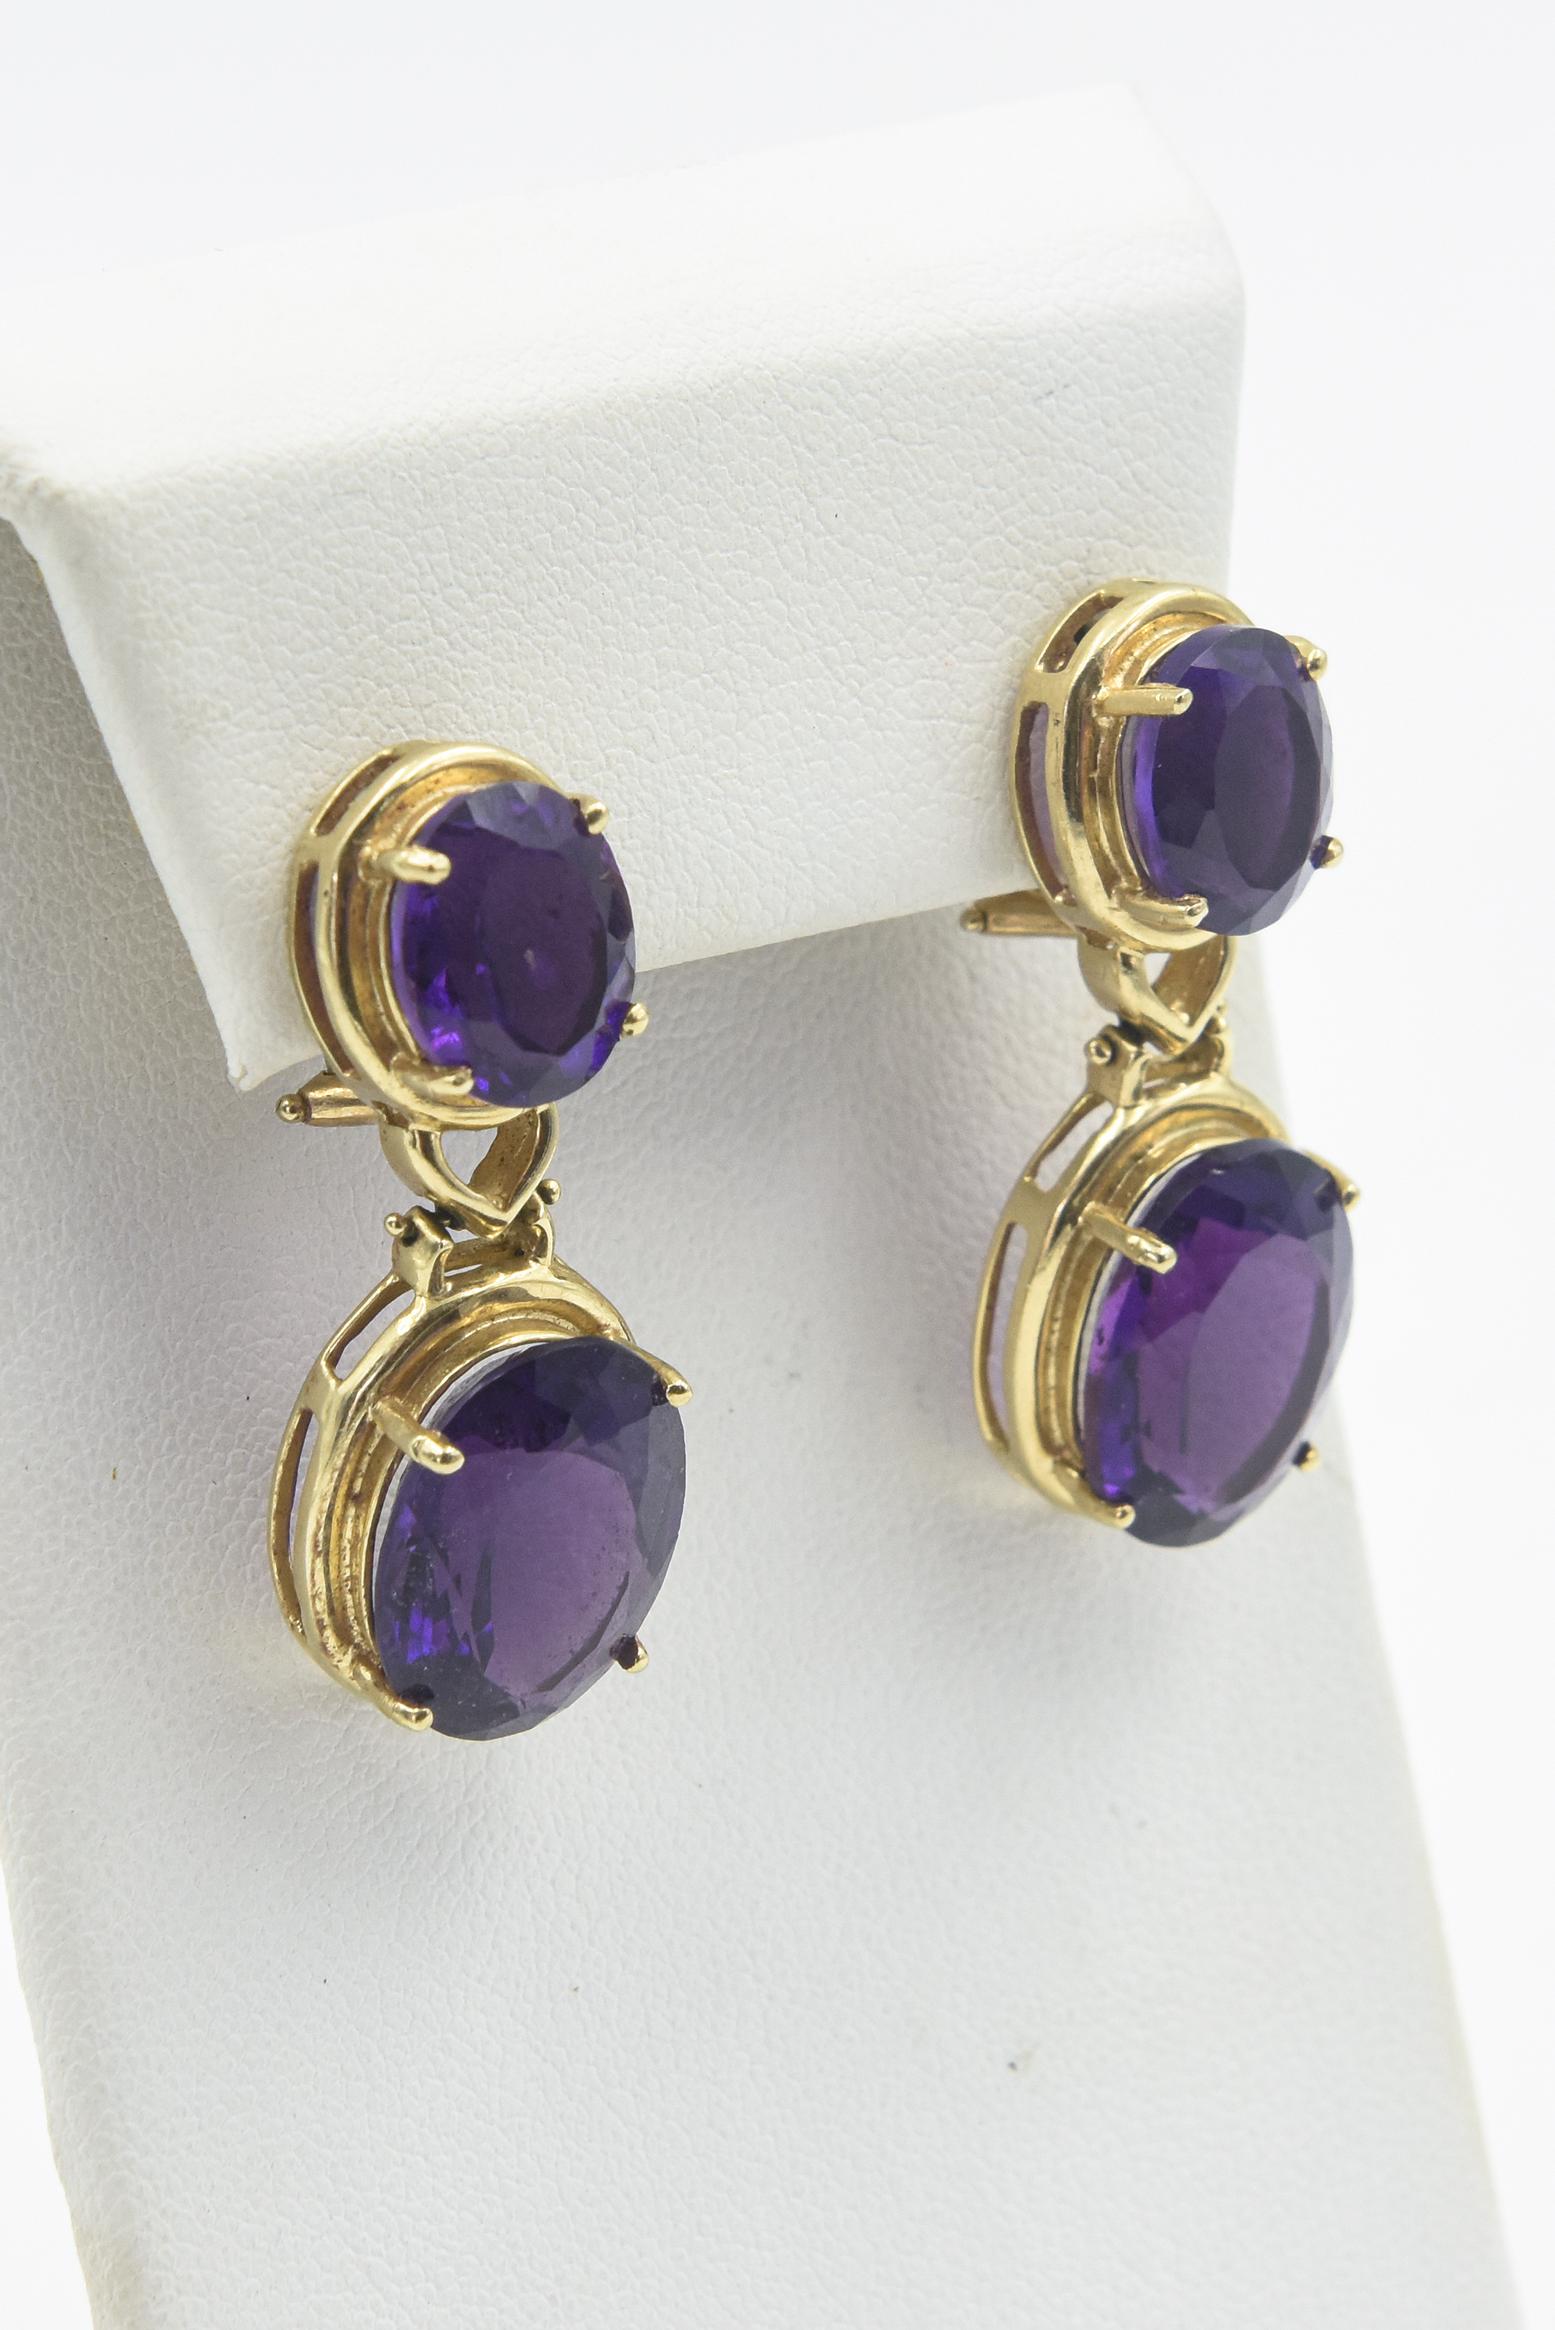 Oval Cut Large Oval Amethyst Yellow Gold Pendant with Matching Drop Earrings Set For Sale